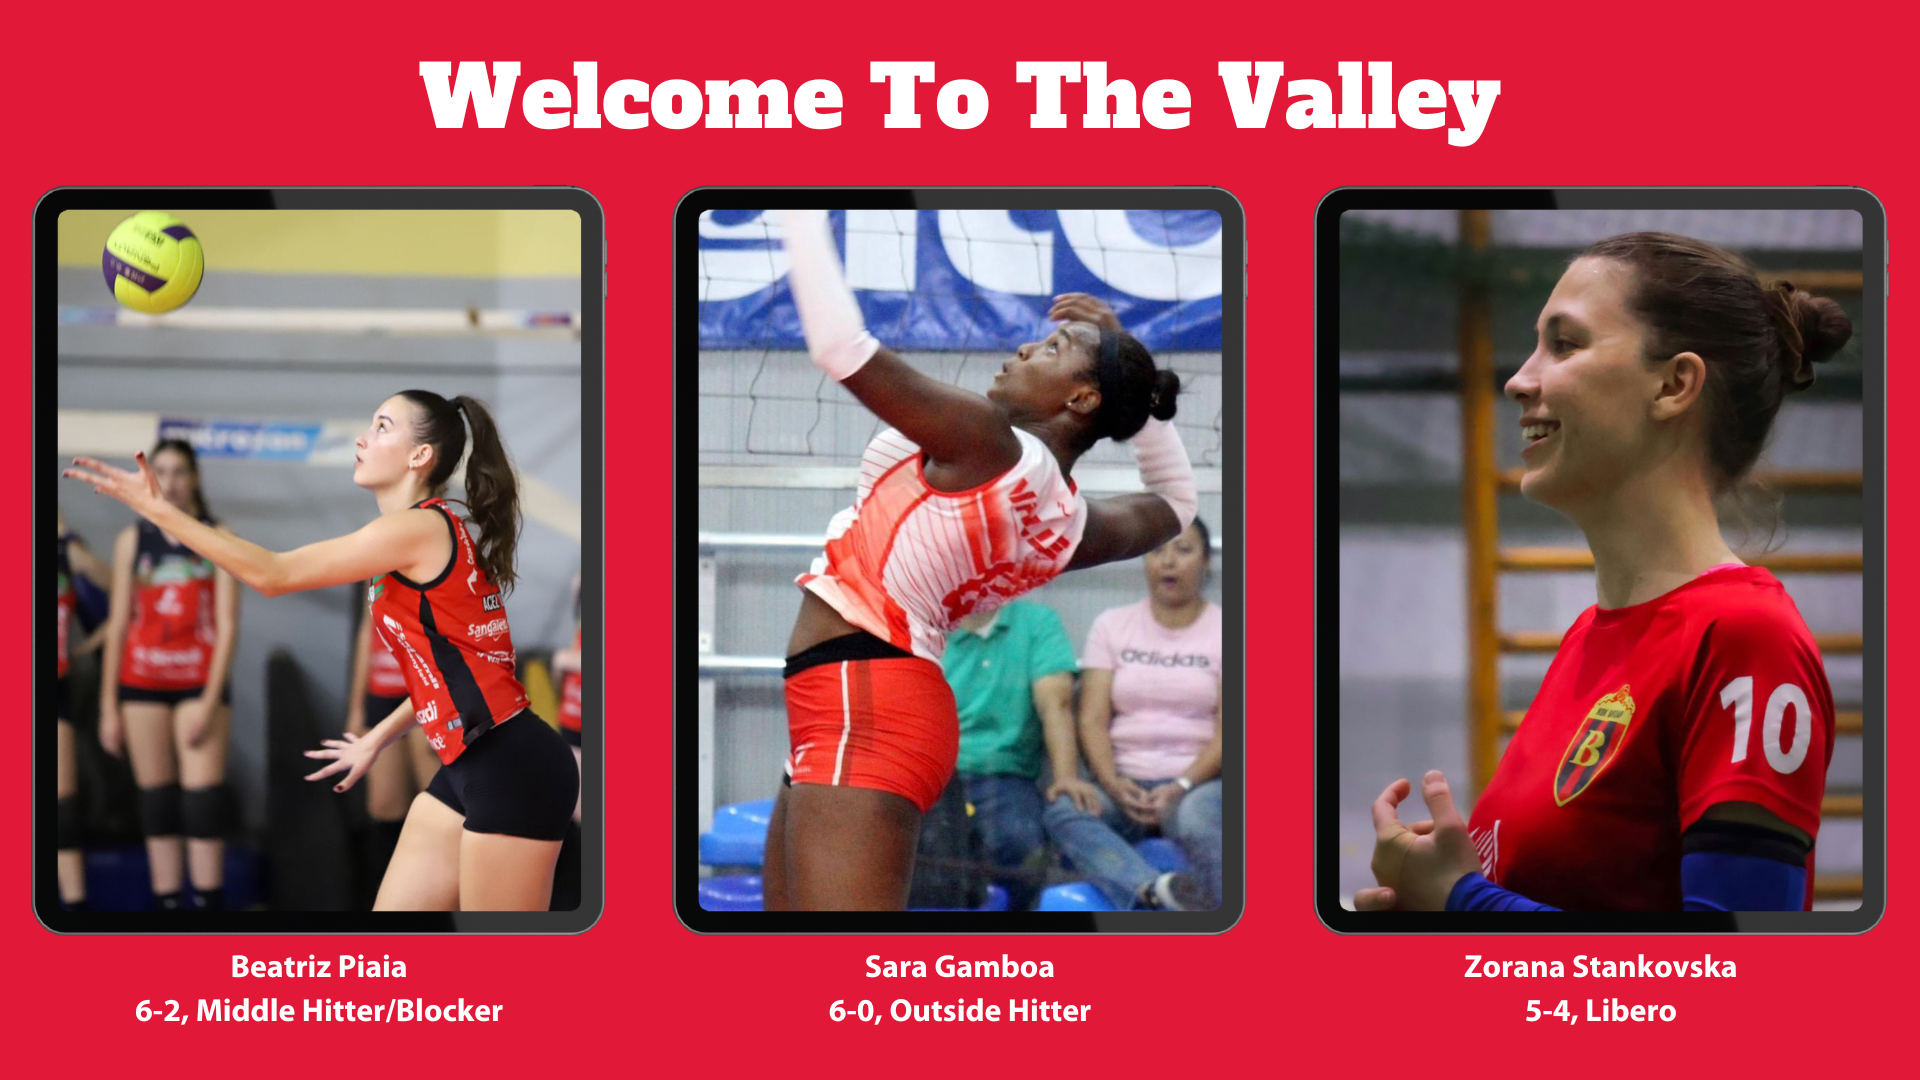 WELCOME TO THE VALLEY: Trio of newcomers join Lady Cardinals